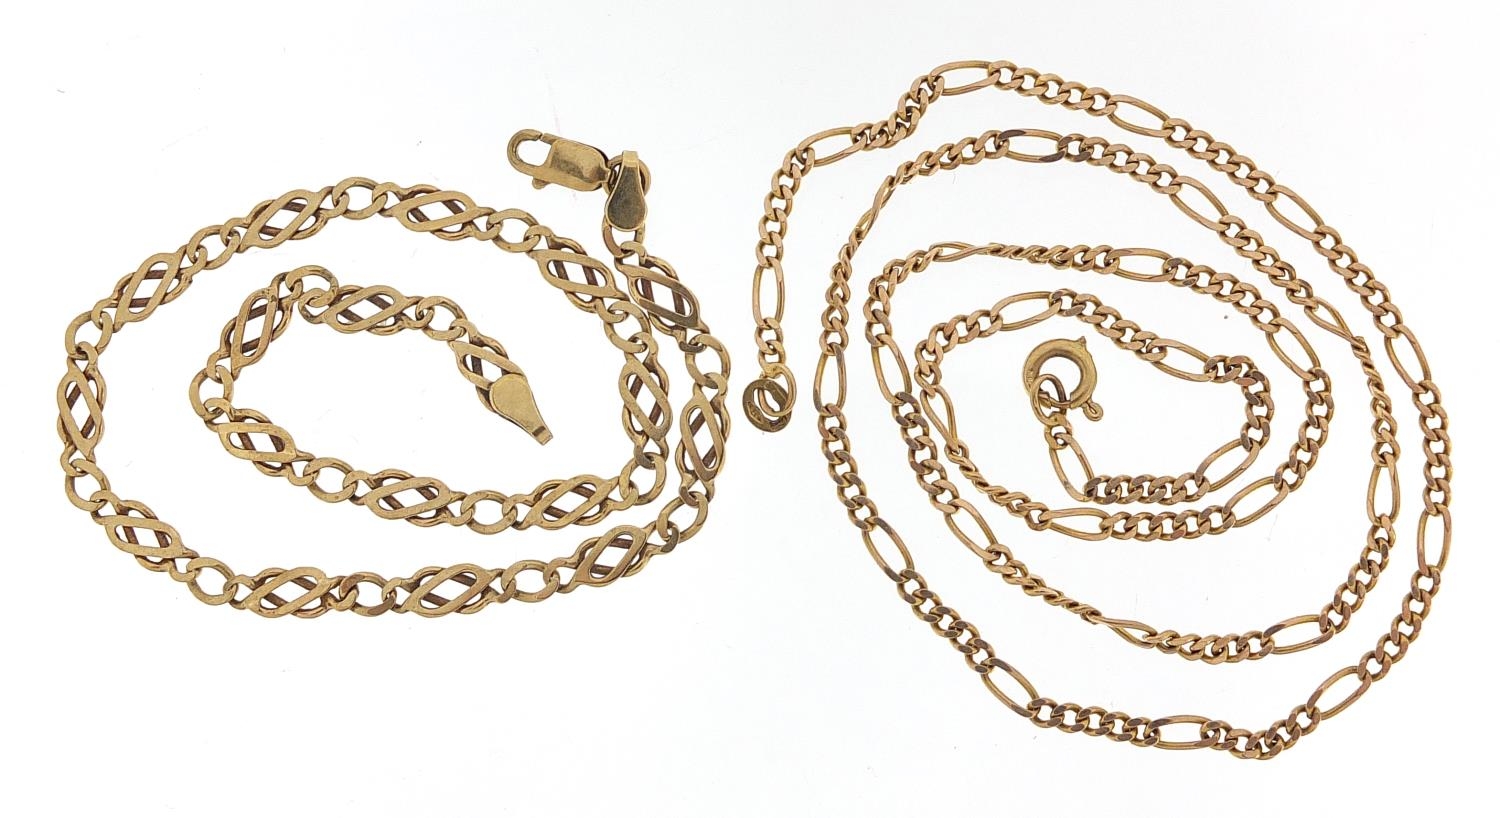 9ct gold Figaro link necklace and 9ct gold multi link bracelet, 48cm and 22cm in length, total 11.2g - Image 2 of 5